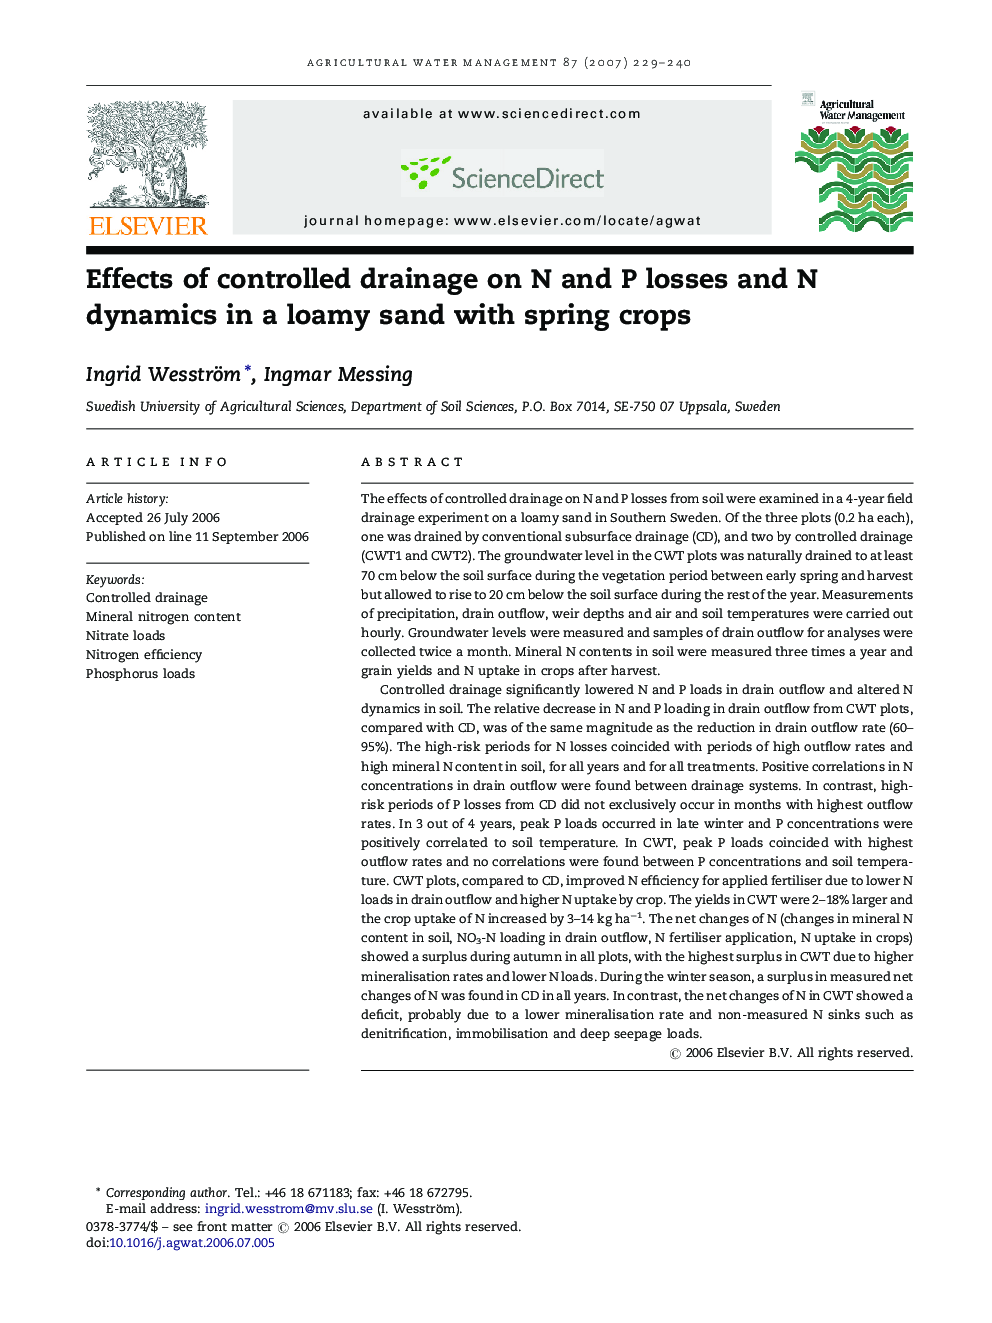 Effects of controlled drainage on N and P losses and N dynamics in a loamy sand with spring crops